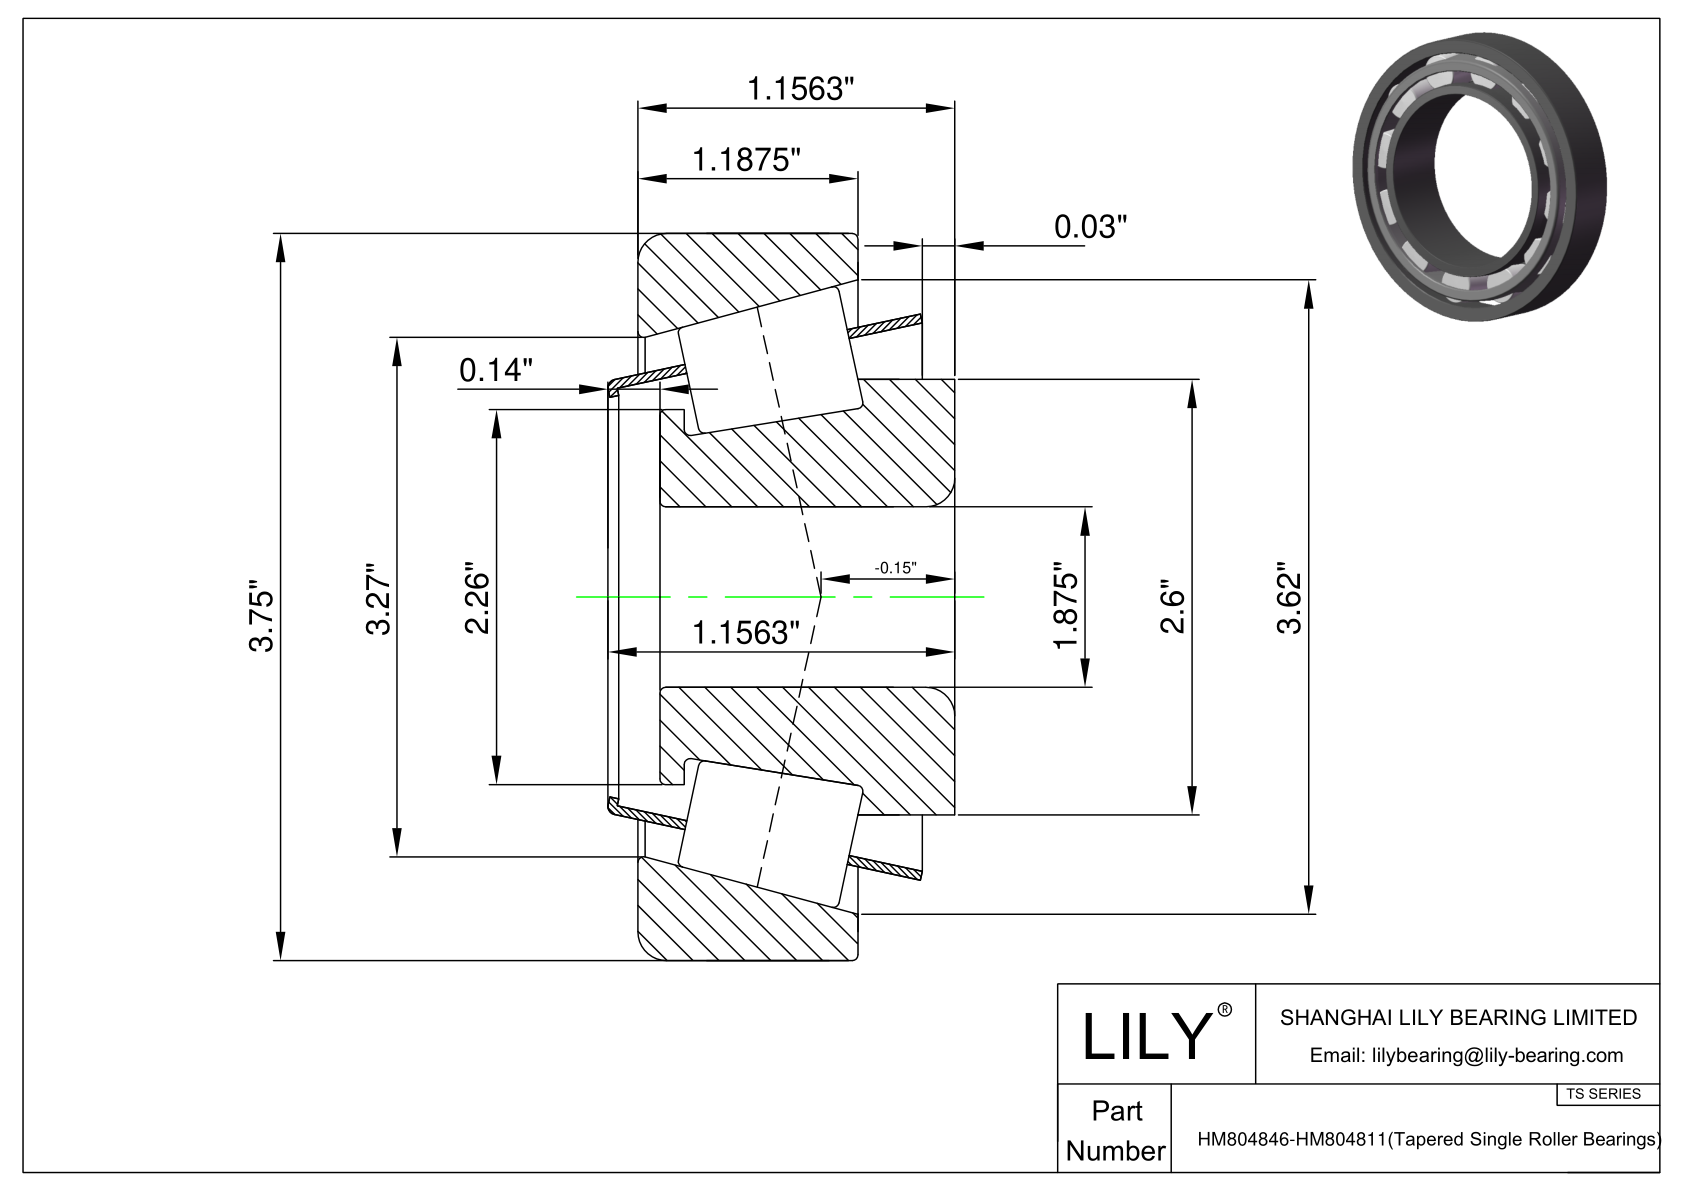 HM804846-HM804811 TS (Tapered Single Roller Bearings) (Imperial) cad drawing